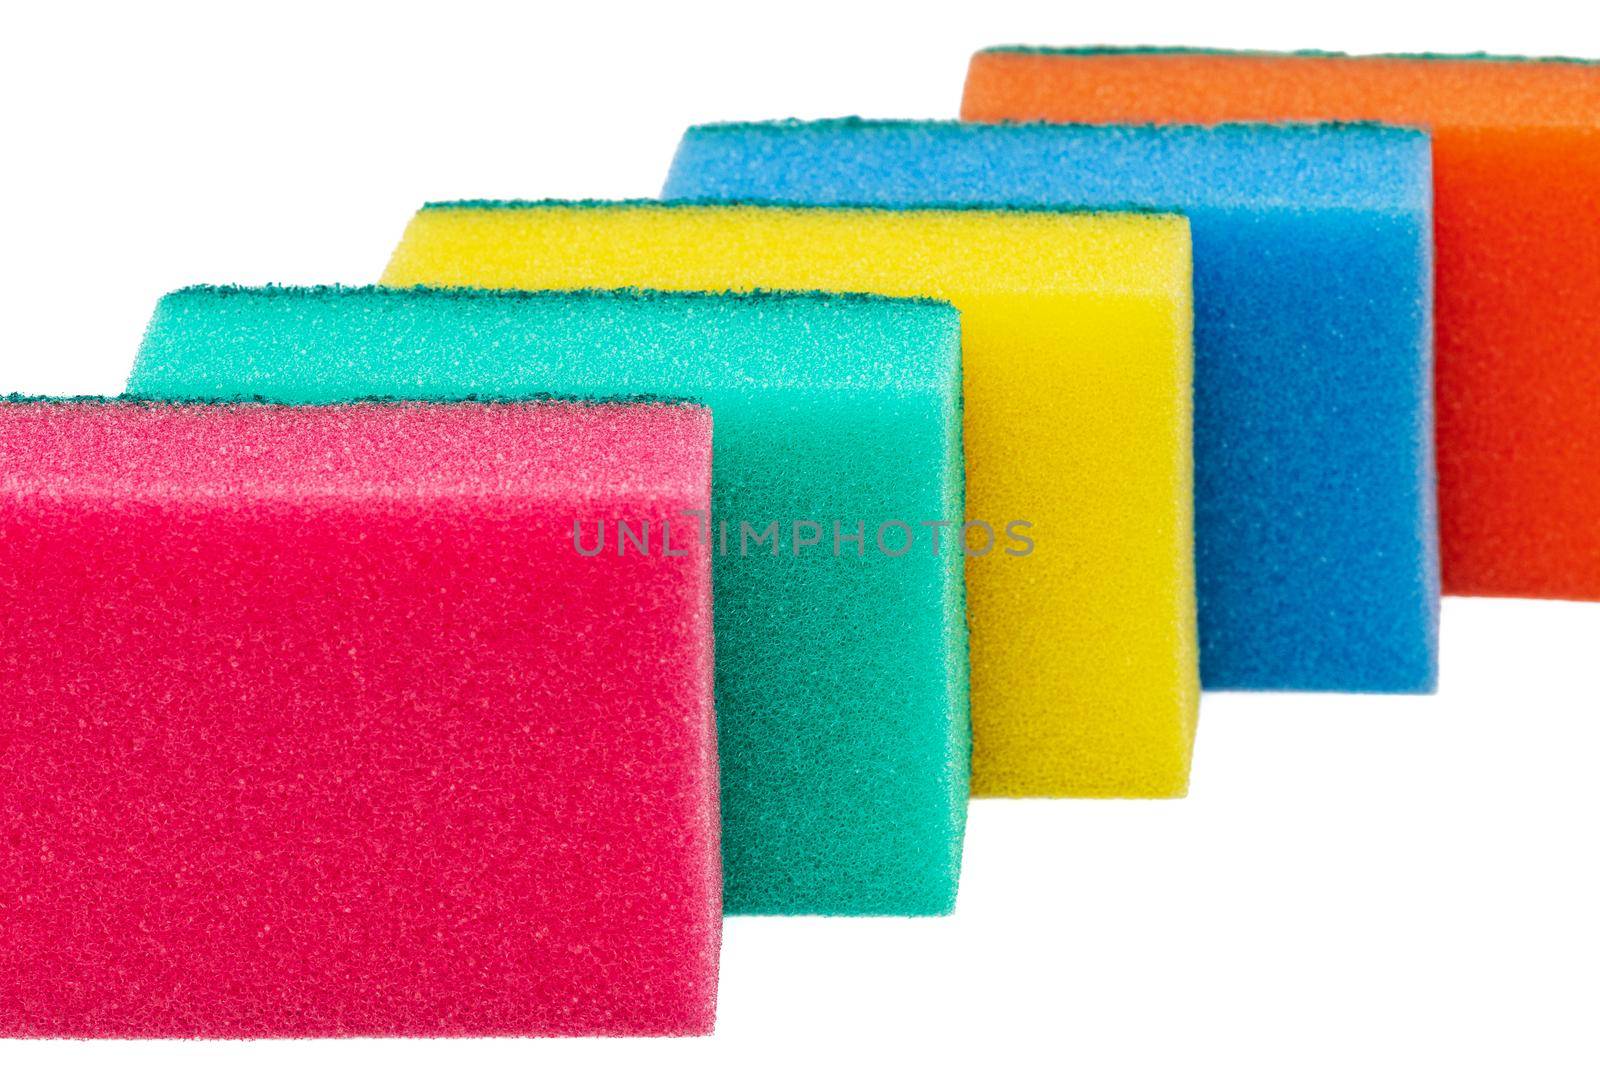 Set of different bright colored foam sponges for everyday cleaning in kitchen and washing dishes by Alexander-Piragis